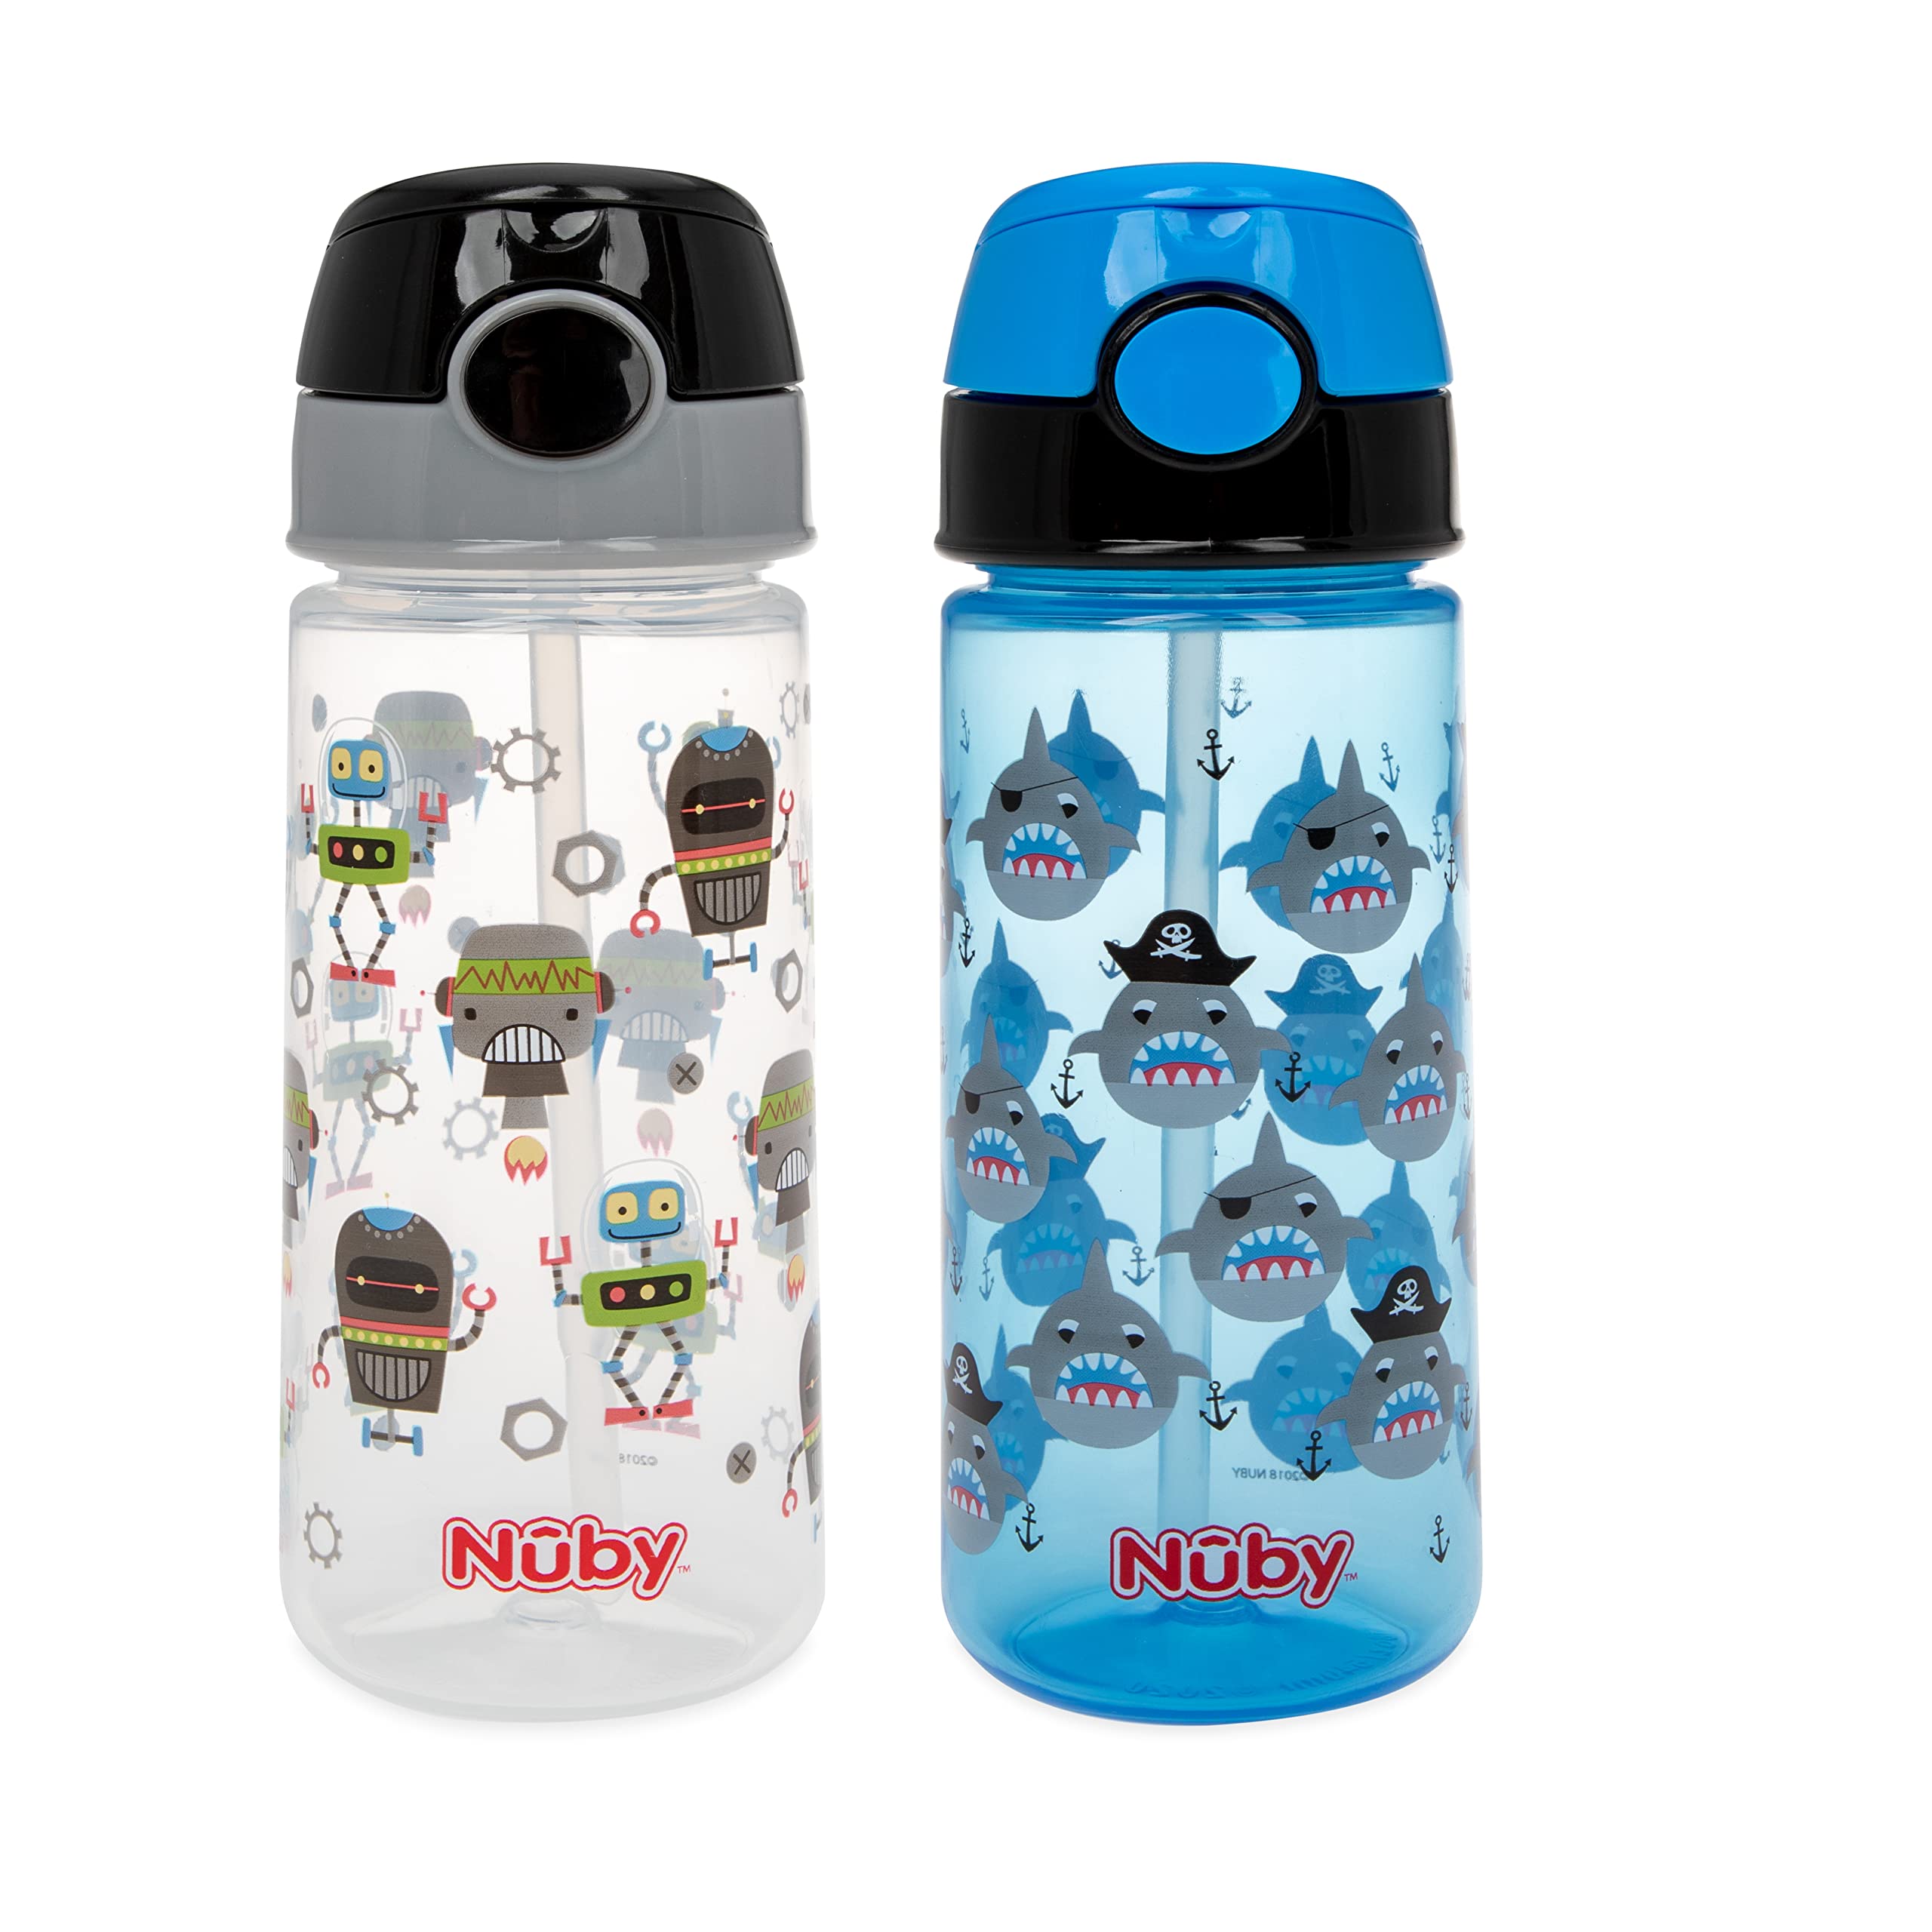 Nuby 2-Pack Kid’s Printed Flip-it Active Water Bottle with Push Button Cap and Soft Straw - 18oz / 540ml, 18+ Months, 2-Pack, Prints May Vary